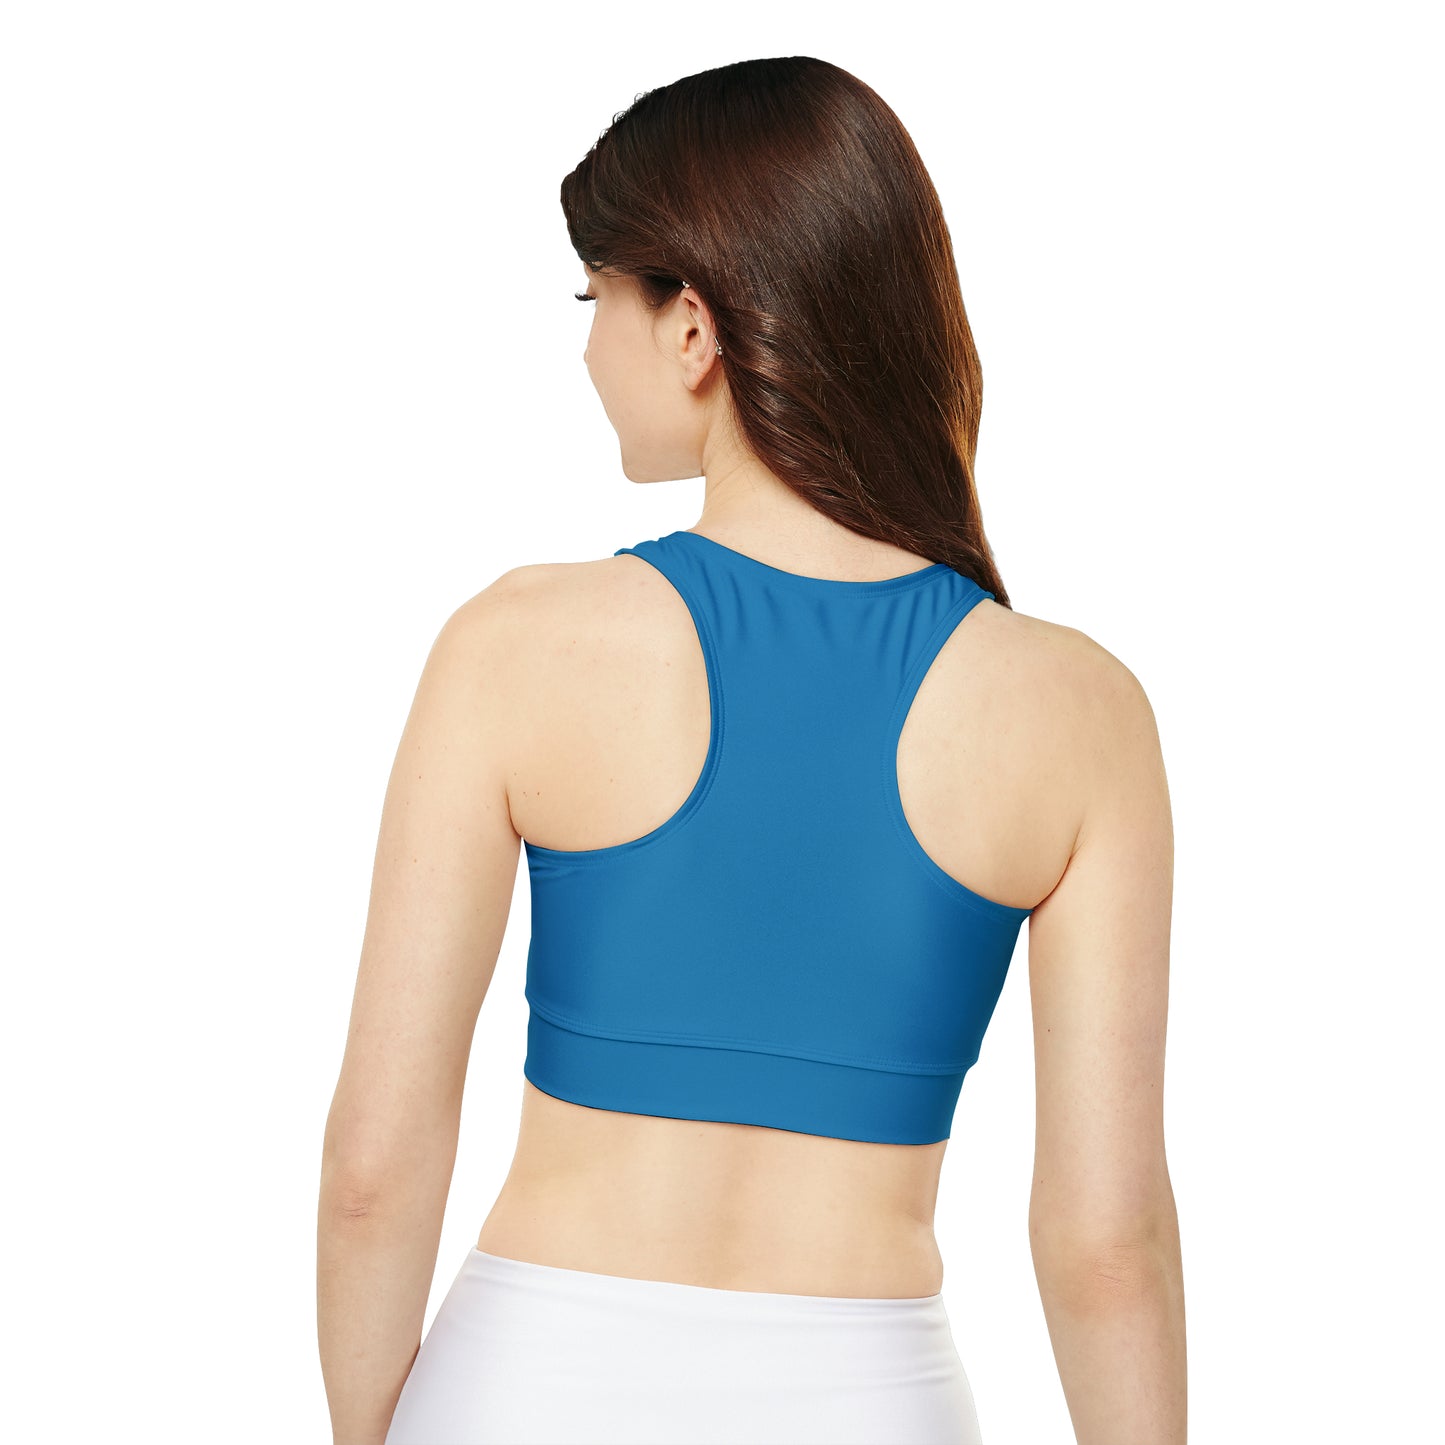 Solid Turquoise Fully Lined, Padded Sports Bra